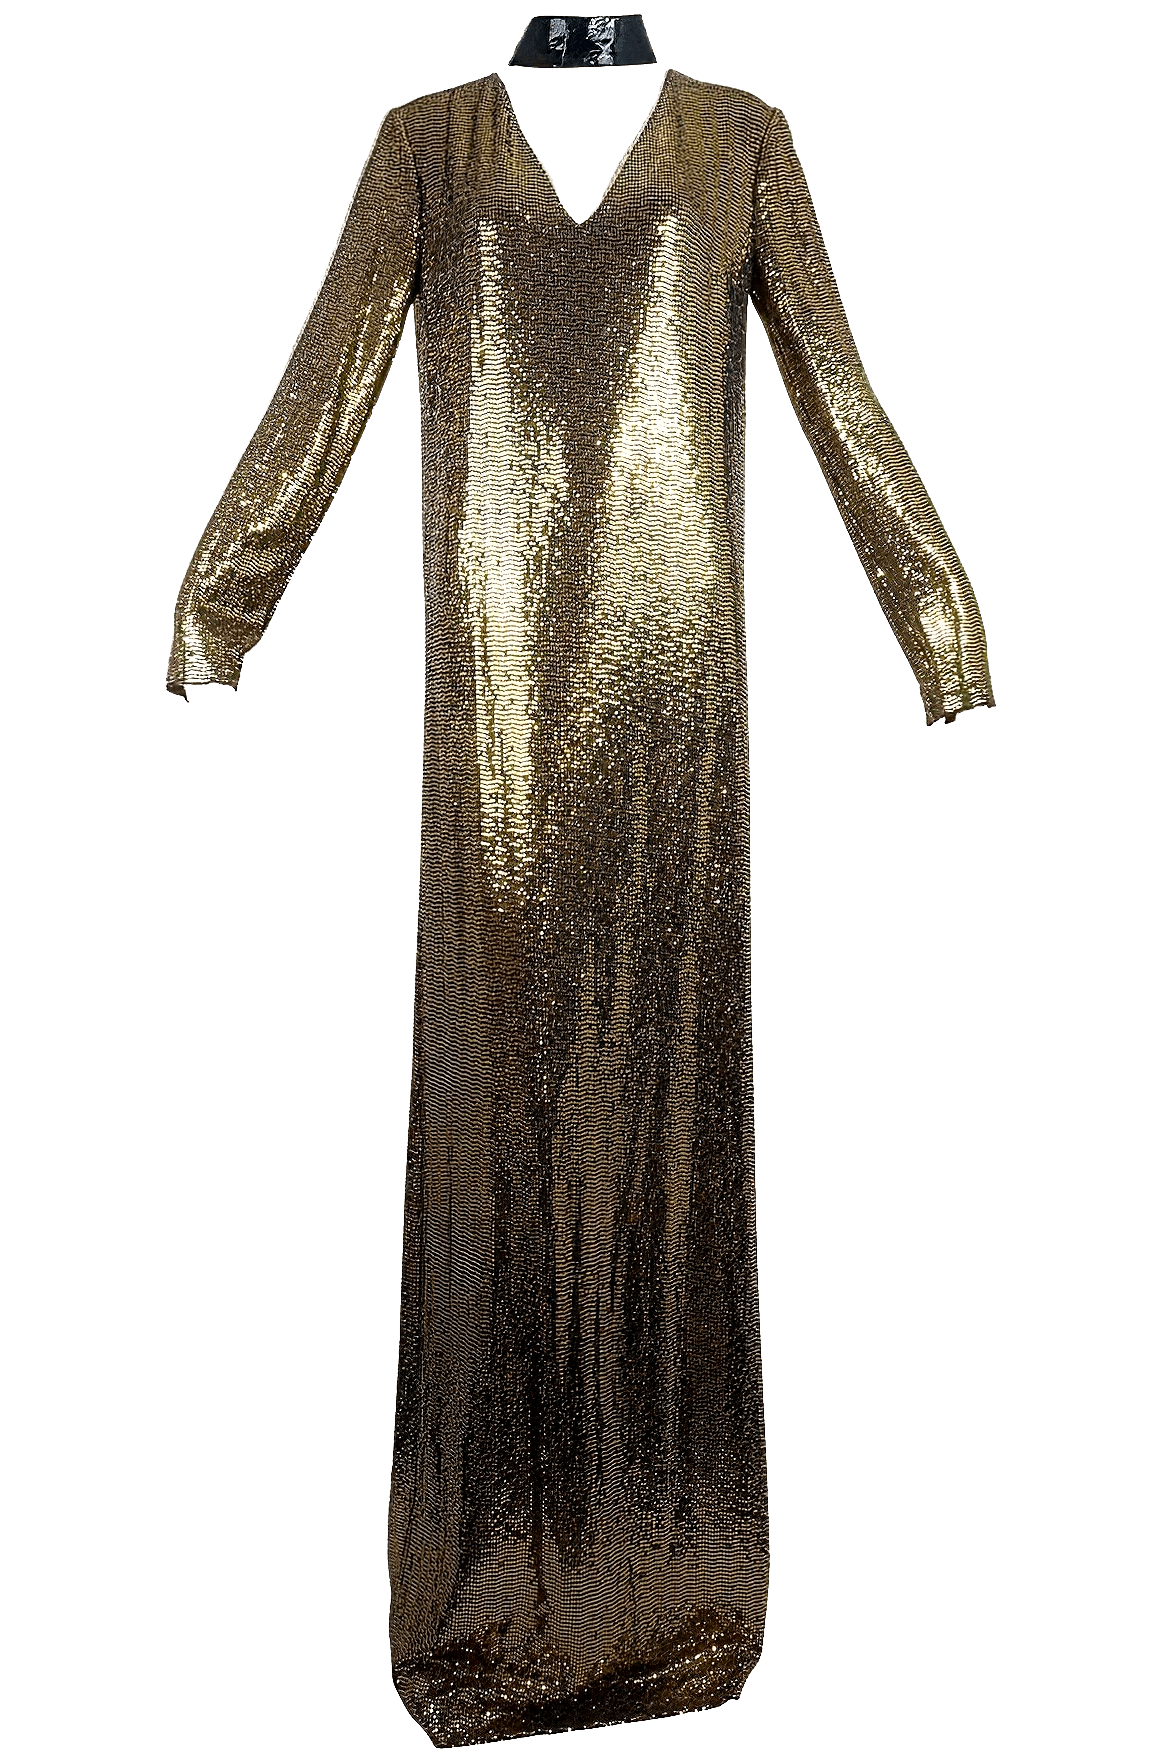 Gucci Snakeskin Pattern Laminated Gold Gown w/Patent Leather Choker